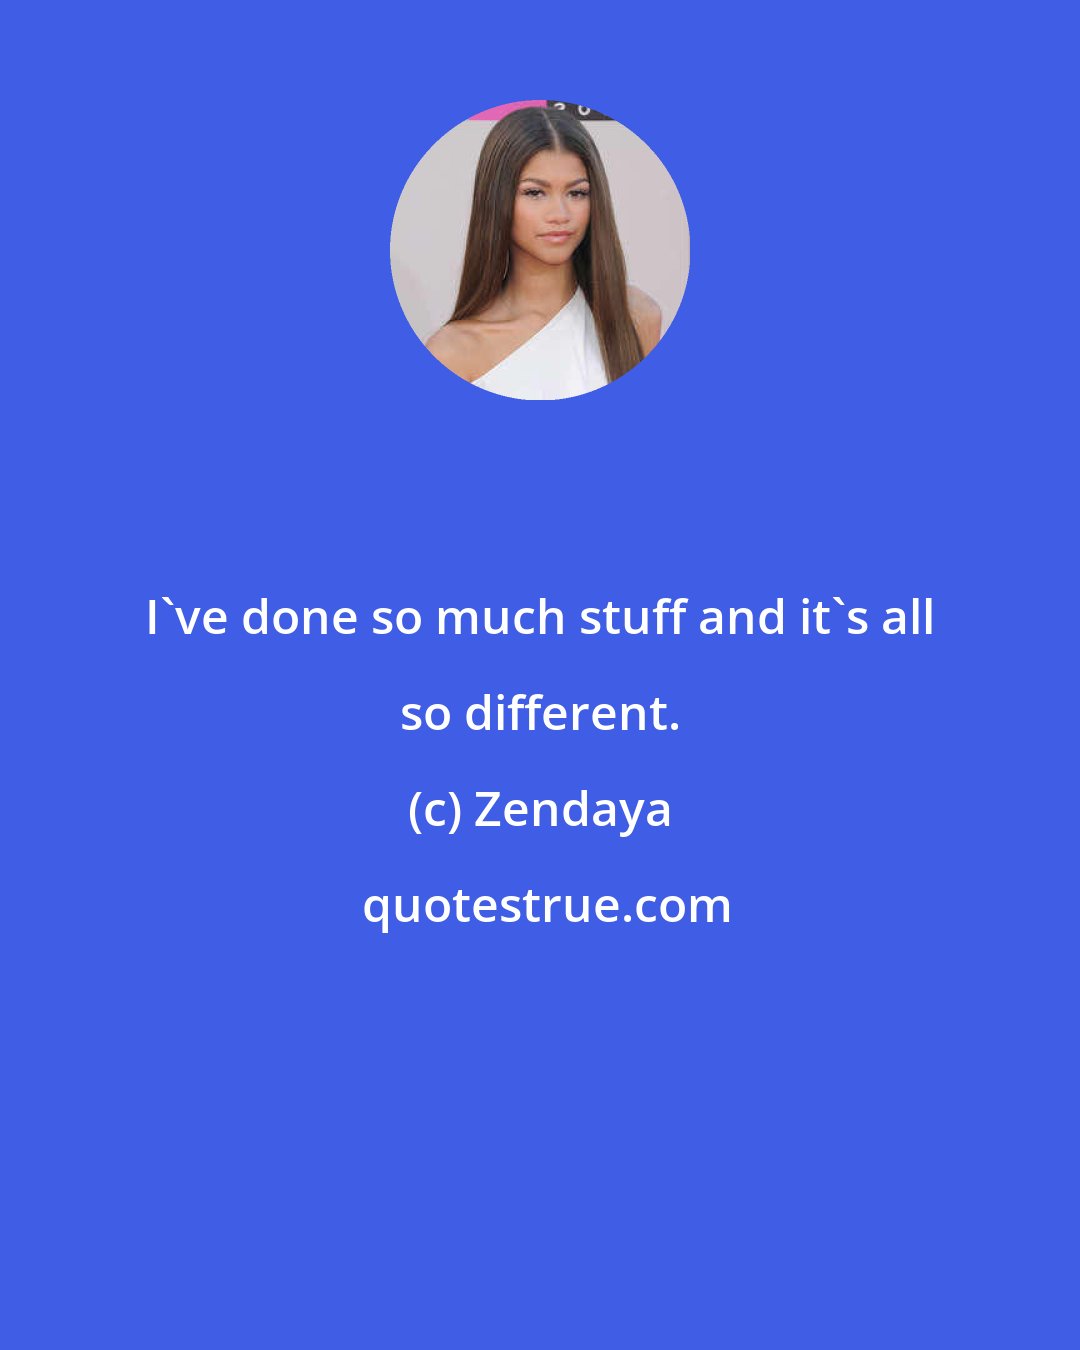 Zendaya: I've done so much stuff and it's all so different.